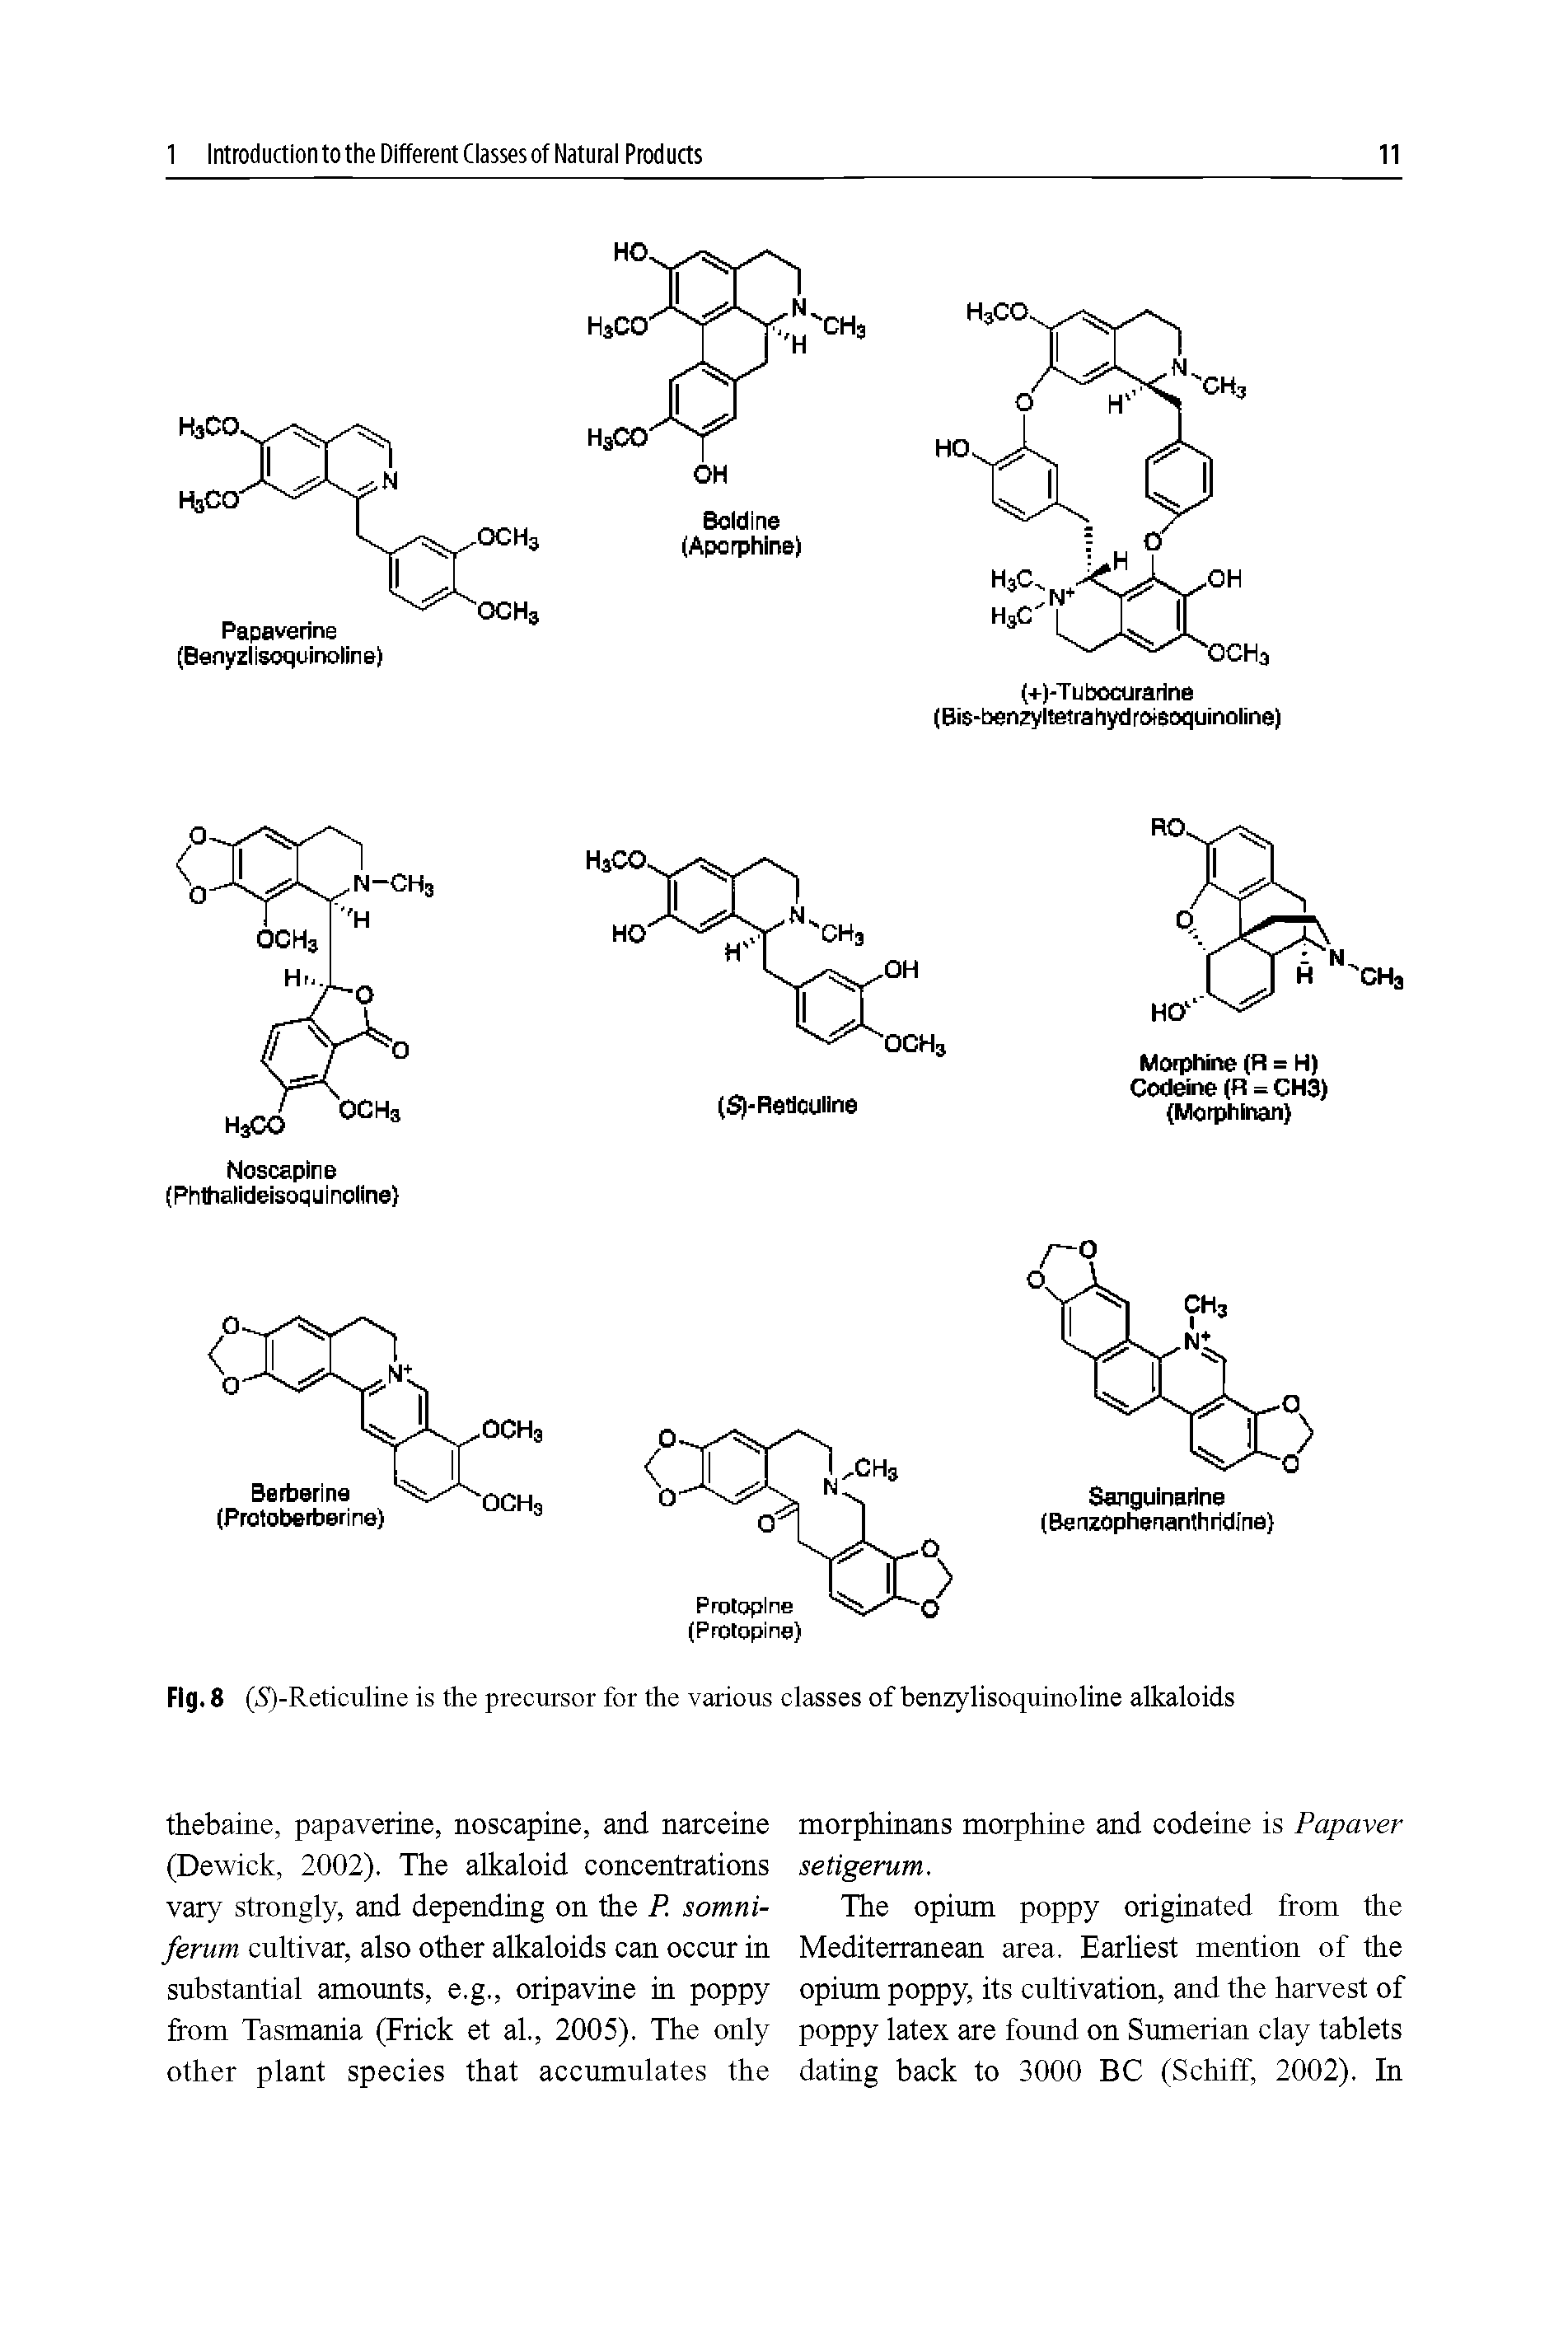 Fig. 8 (5)-Reticuline is the precursor for the various classes of benzylisoquinoline alkaloids...